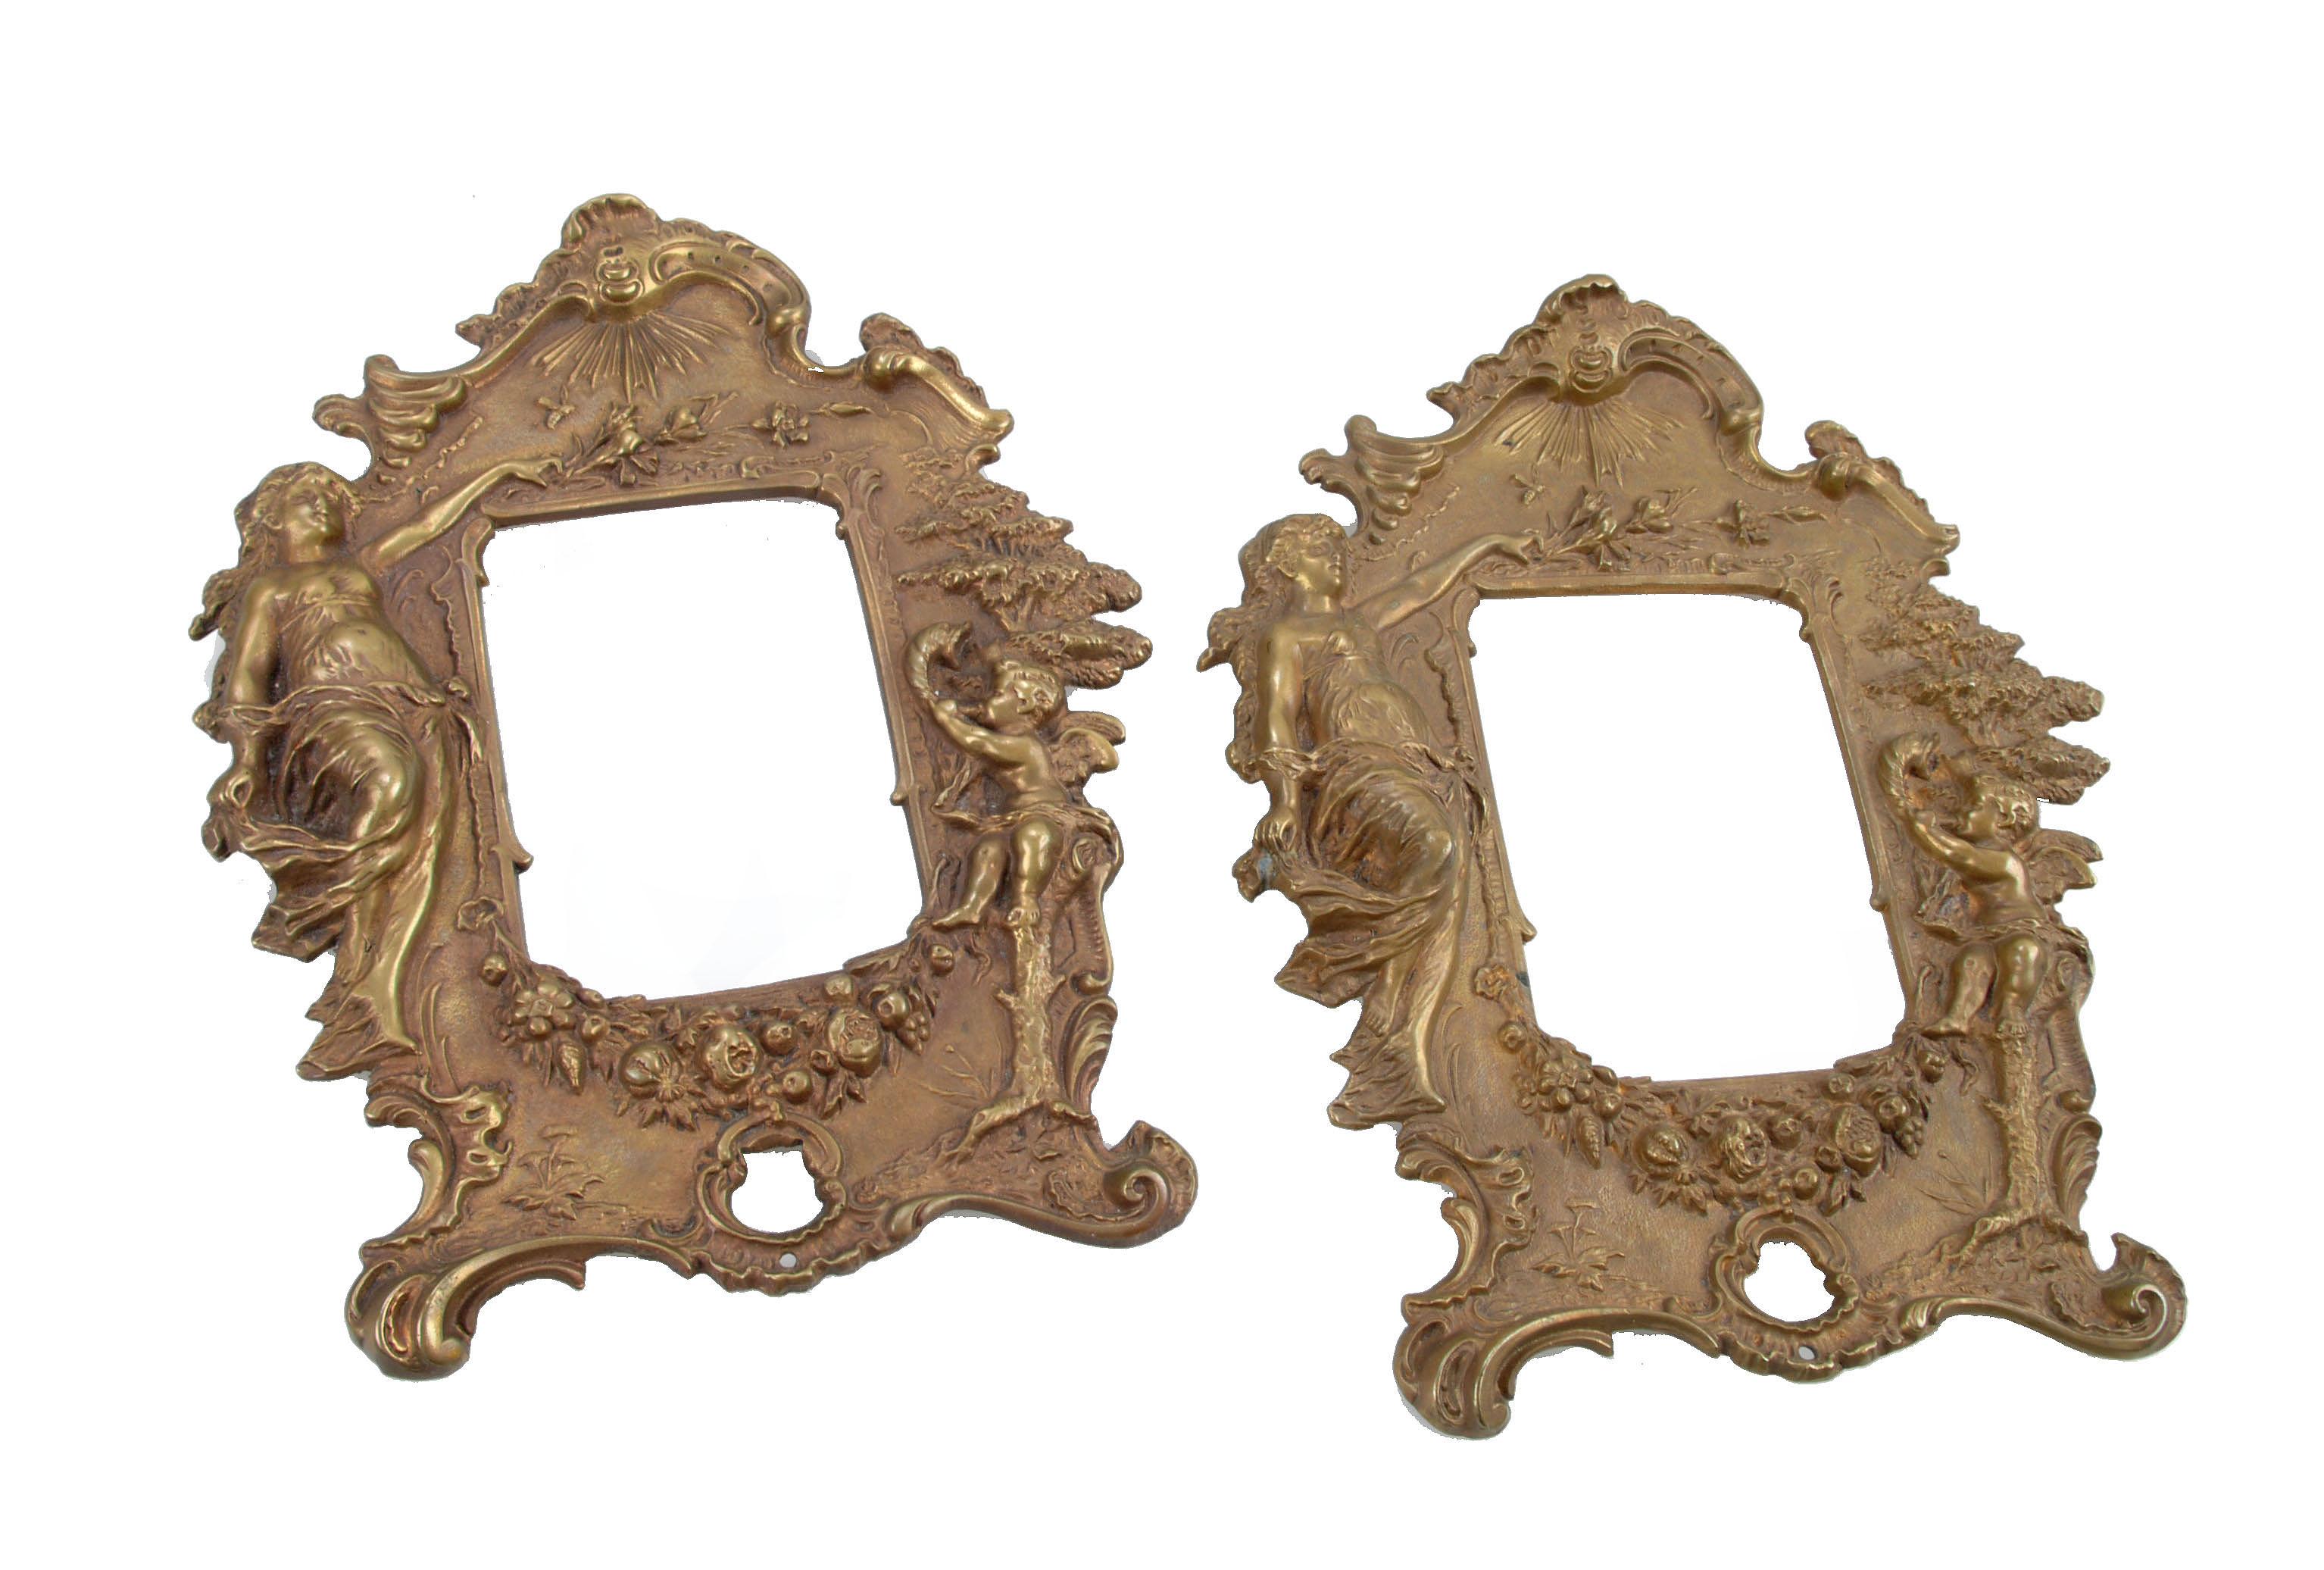 Pair of 1950s Art Nouveau bronze picture frames with angel motifs. 
Each holds an image up to 3.5 inches W x 5 inches H.